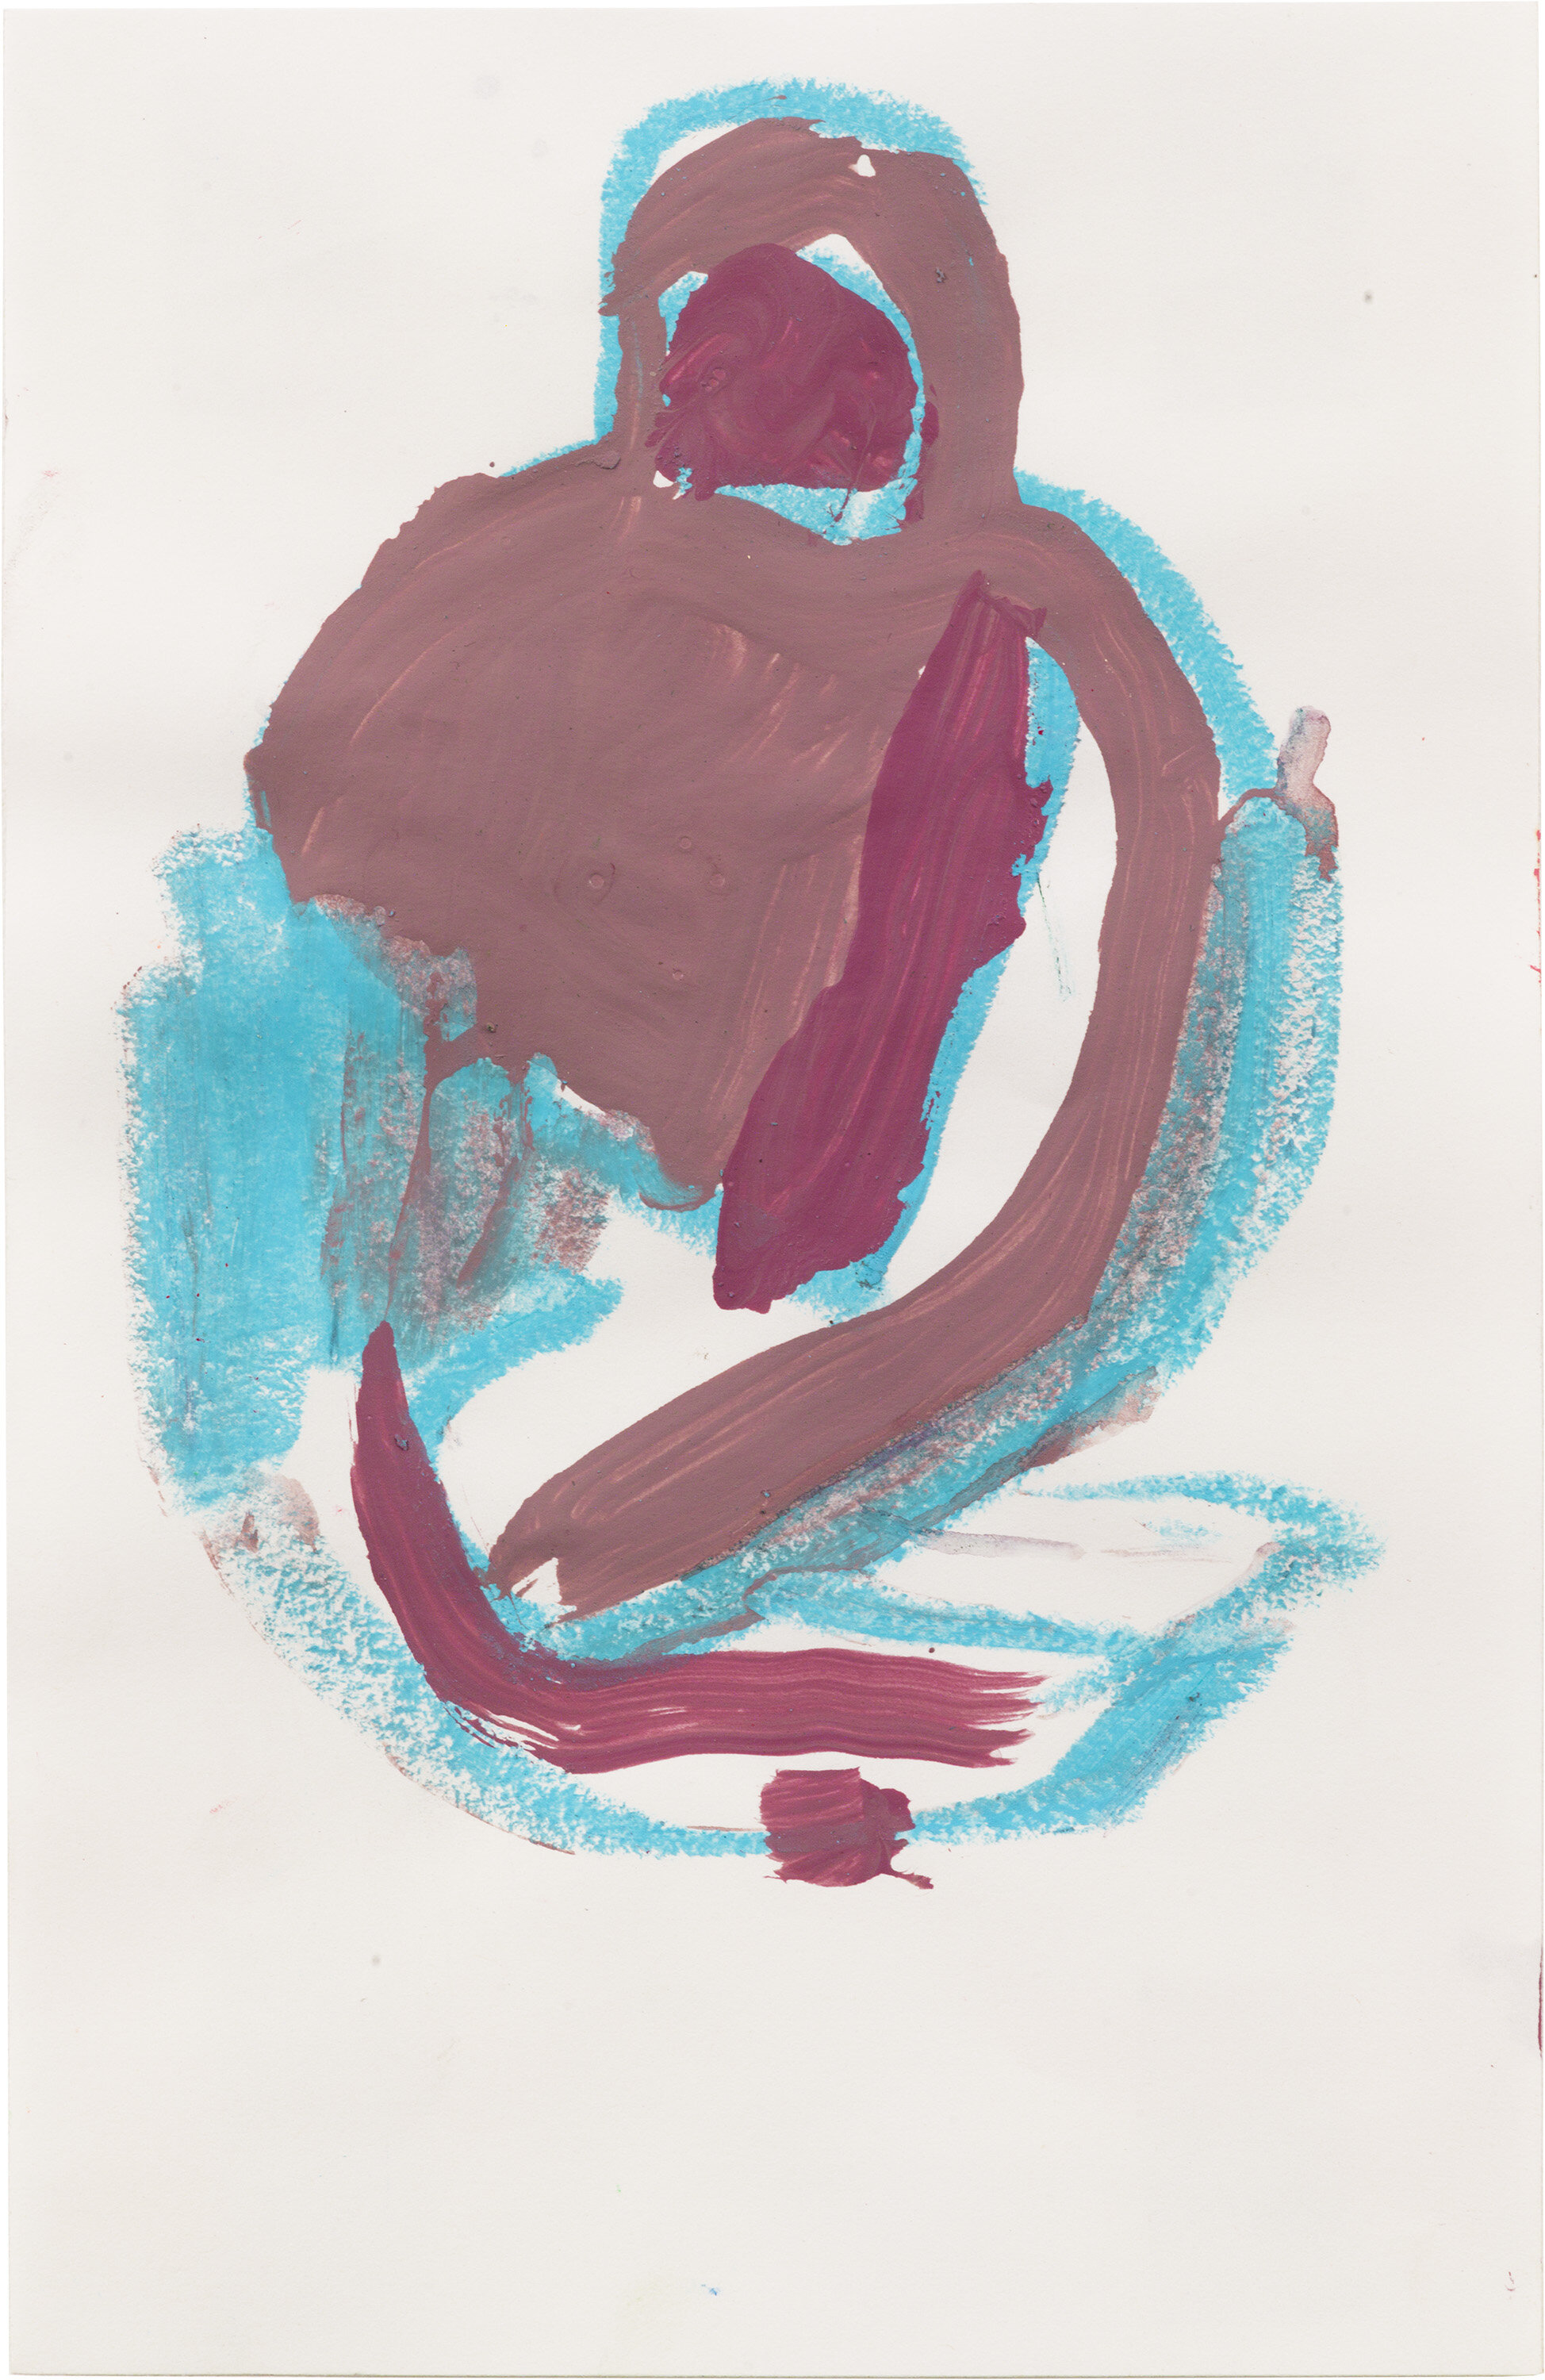  Drew Beattie and Ben Shepard   DBBS-DRW-2013-022   2013  acrylic and oil stick on paper  8.5 x 5.5 inches 